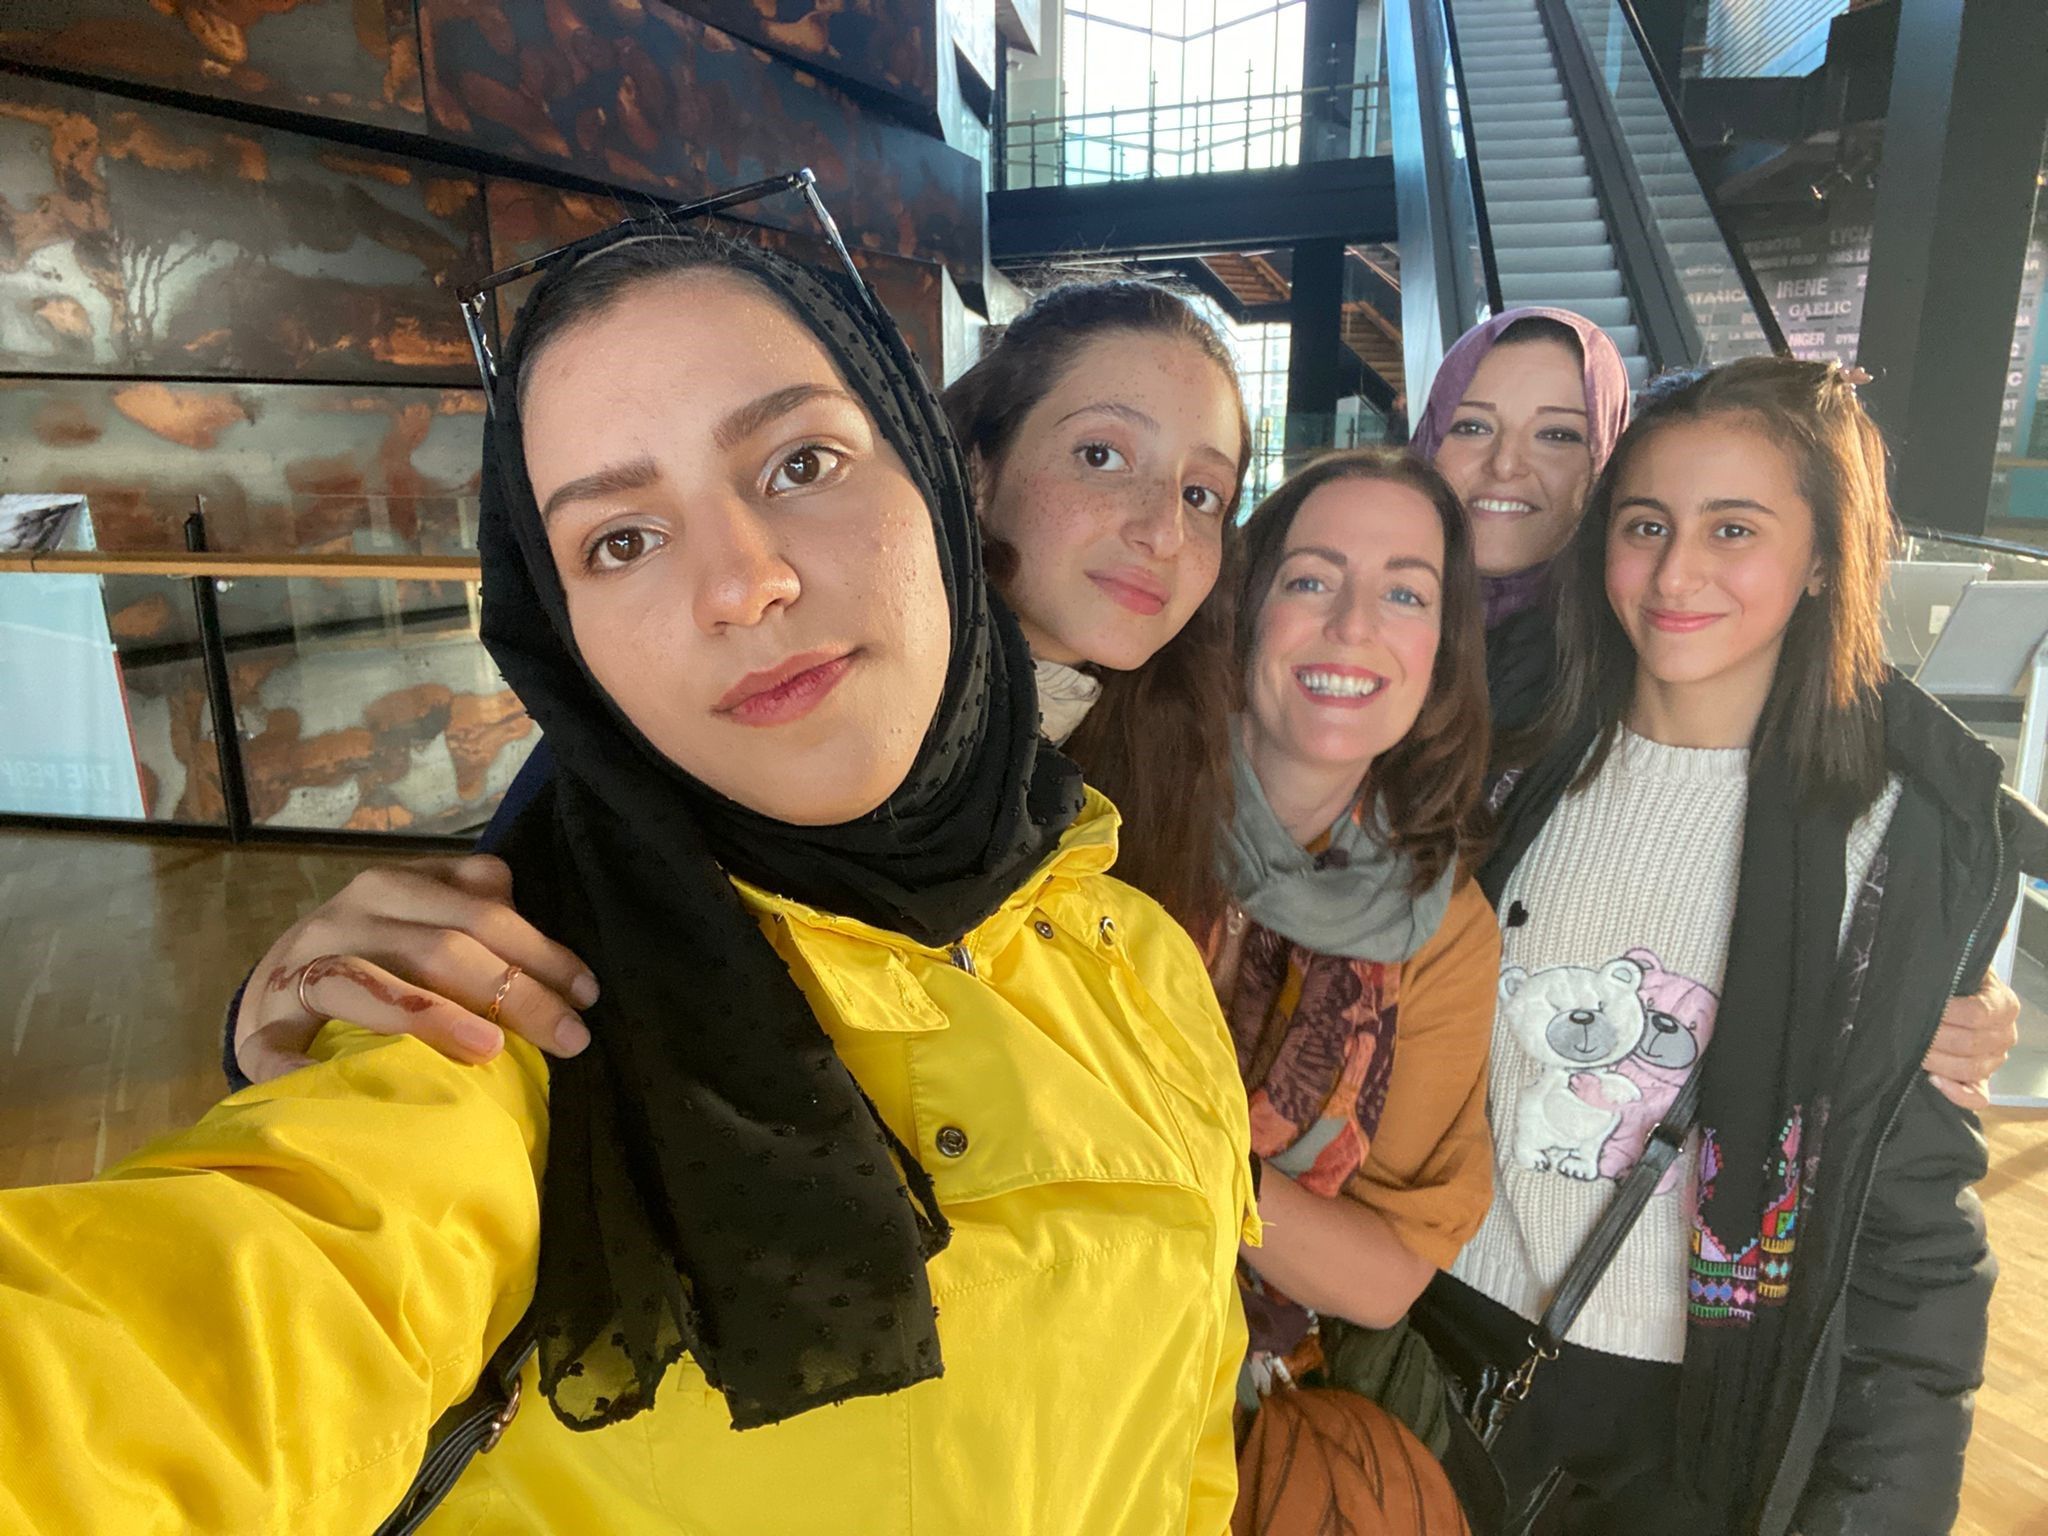 CLOSE BOND: Máiréad Robb, centre, with children Rahaf, Yara and Malak and their teacher Rinan during a trip to Titanic Belfast in September 2022